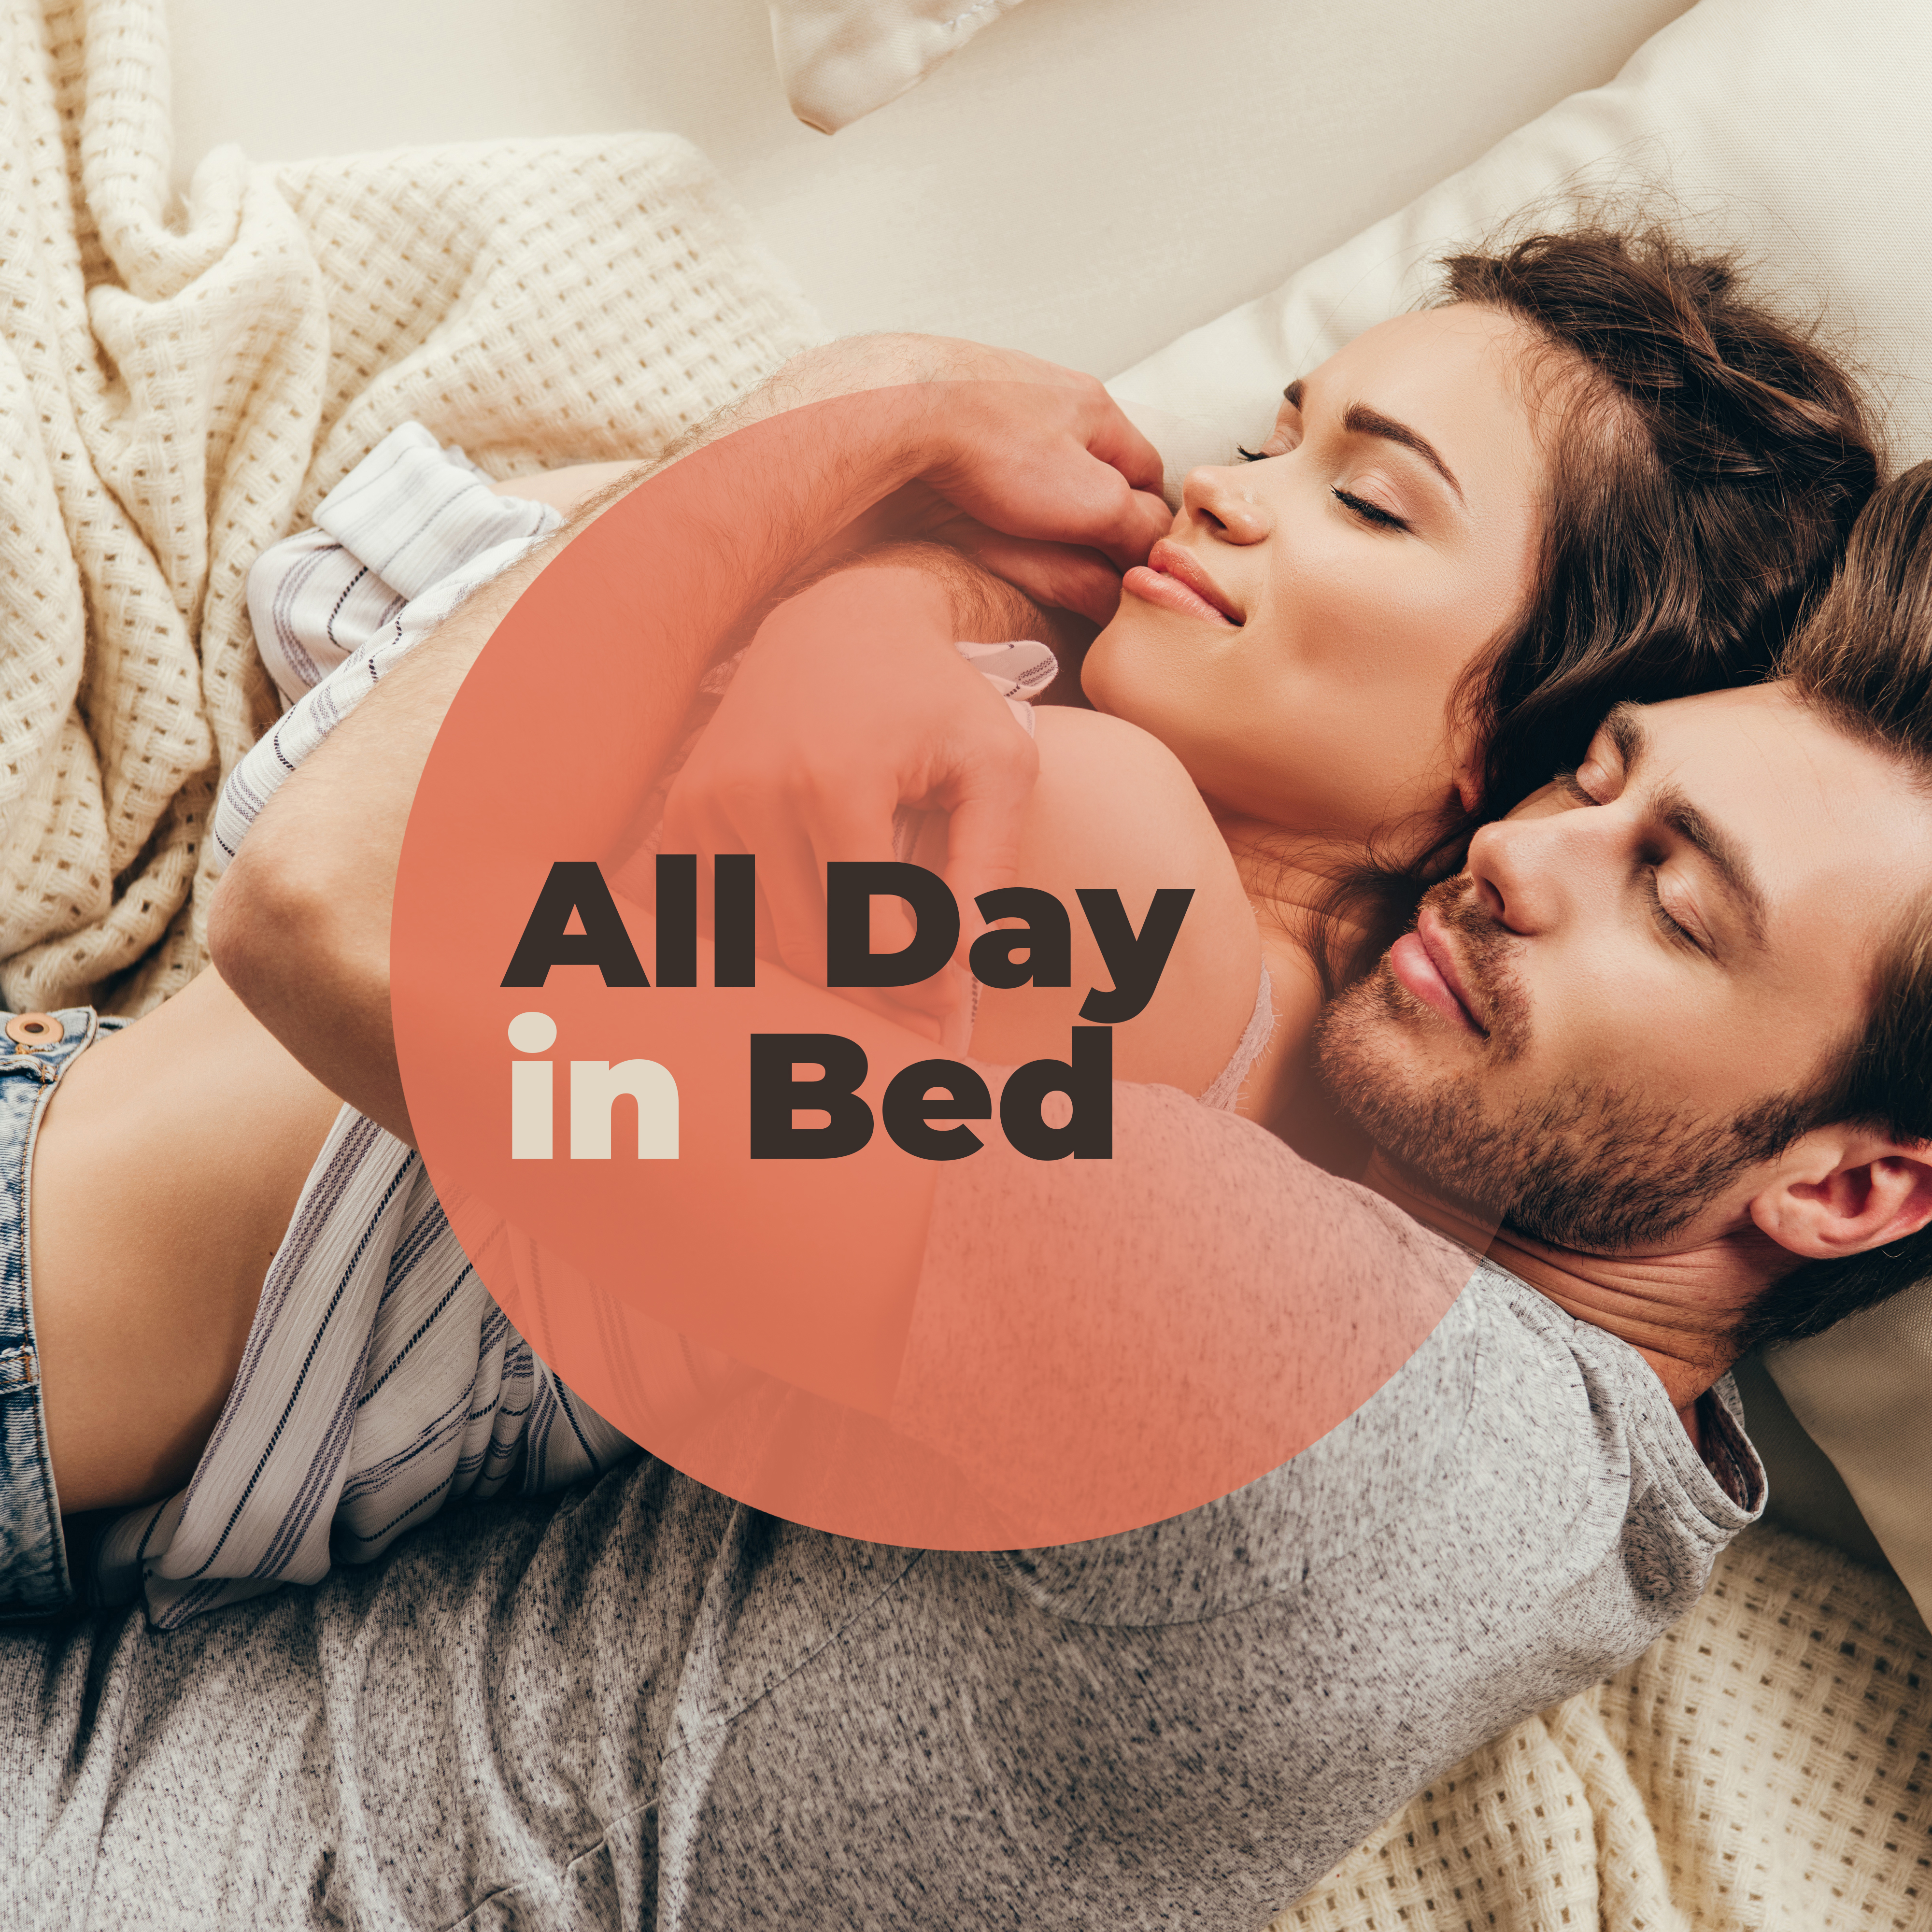 All Day in Bed: Music for a Couple in Love, Making Love, Sensual Touch, Flirting, Romance, Erotic Massage, Shared Time with a Lover or the Other Half